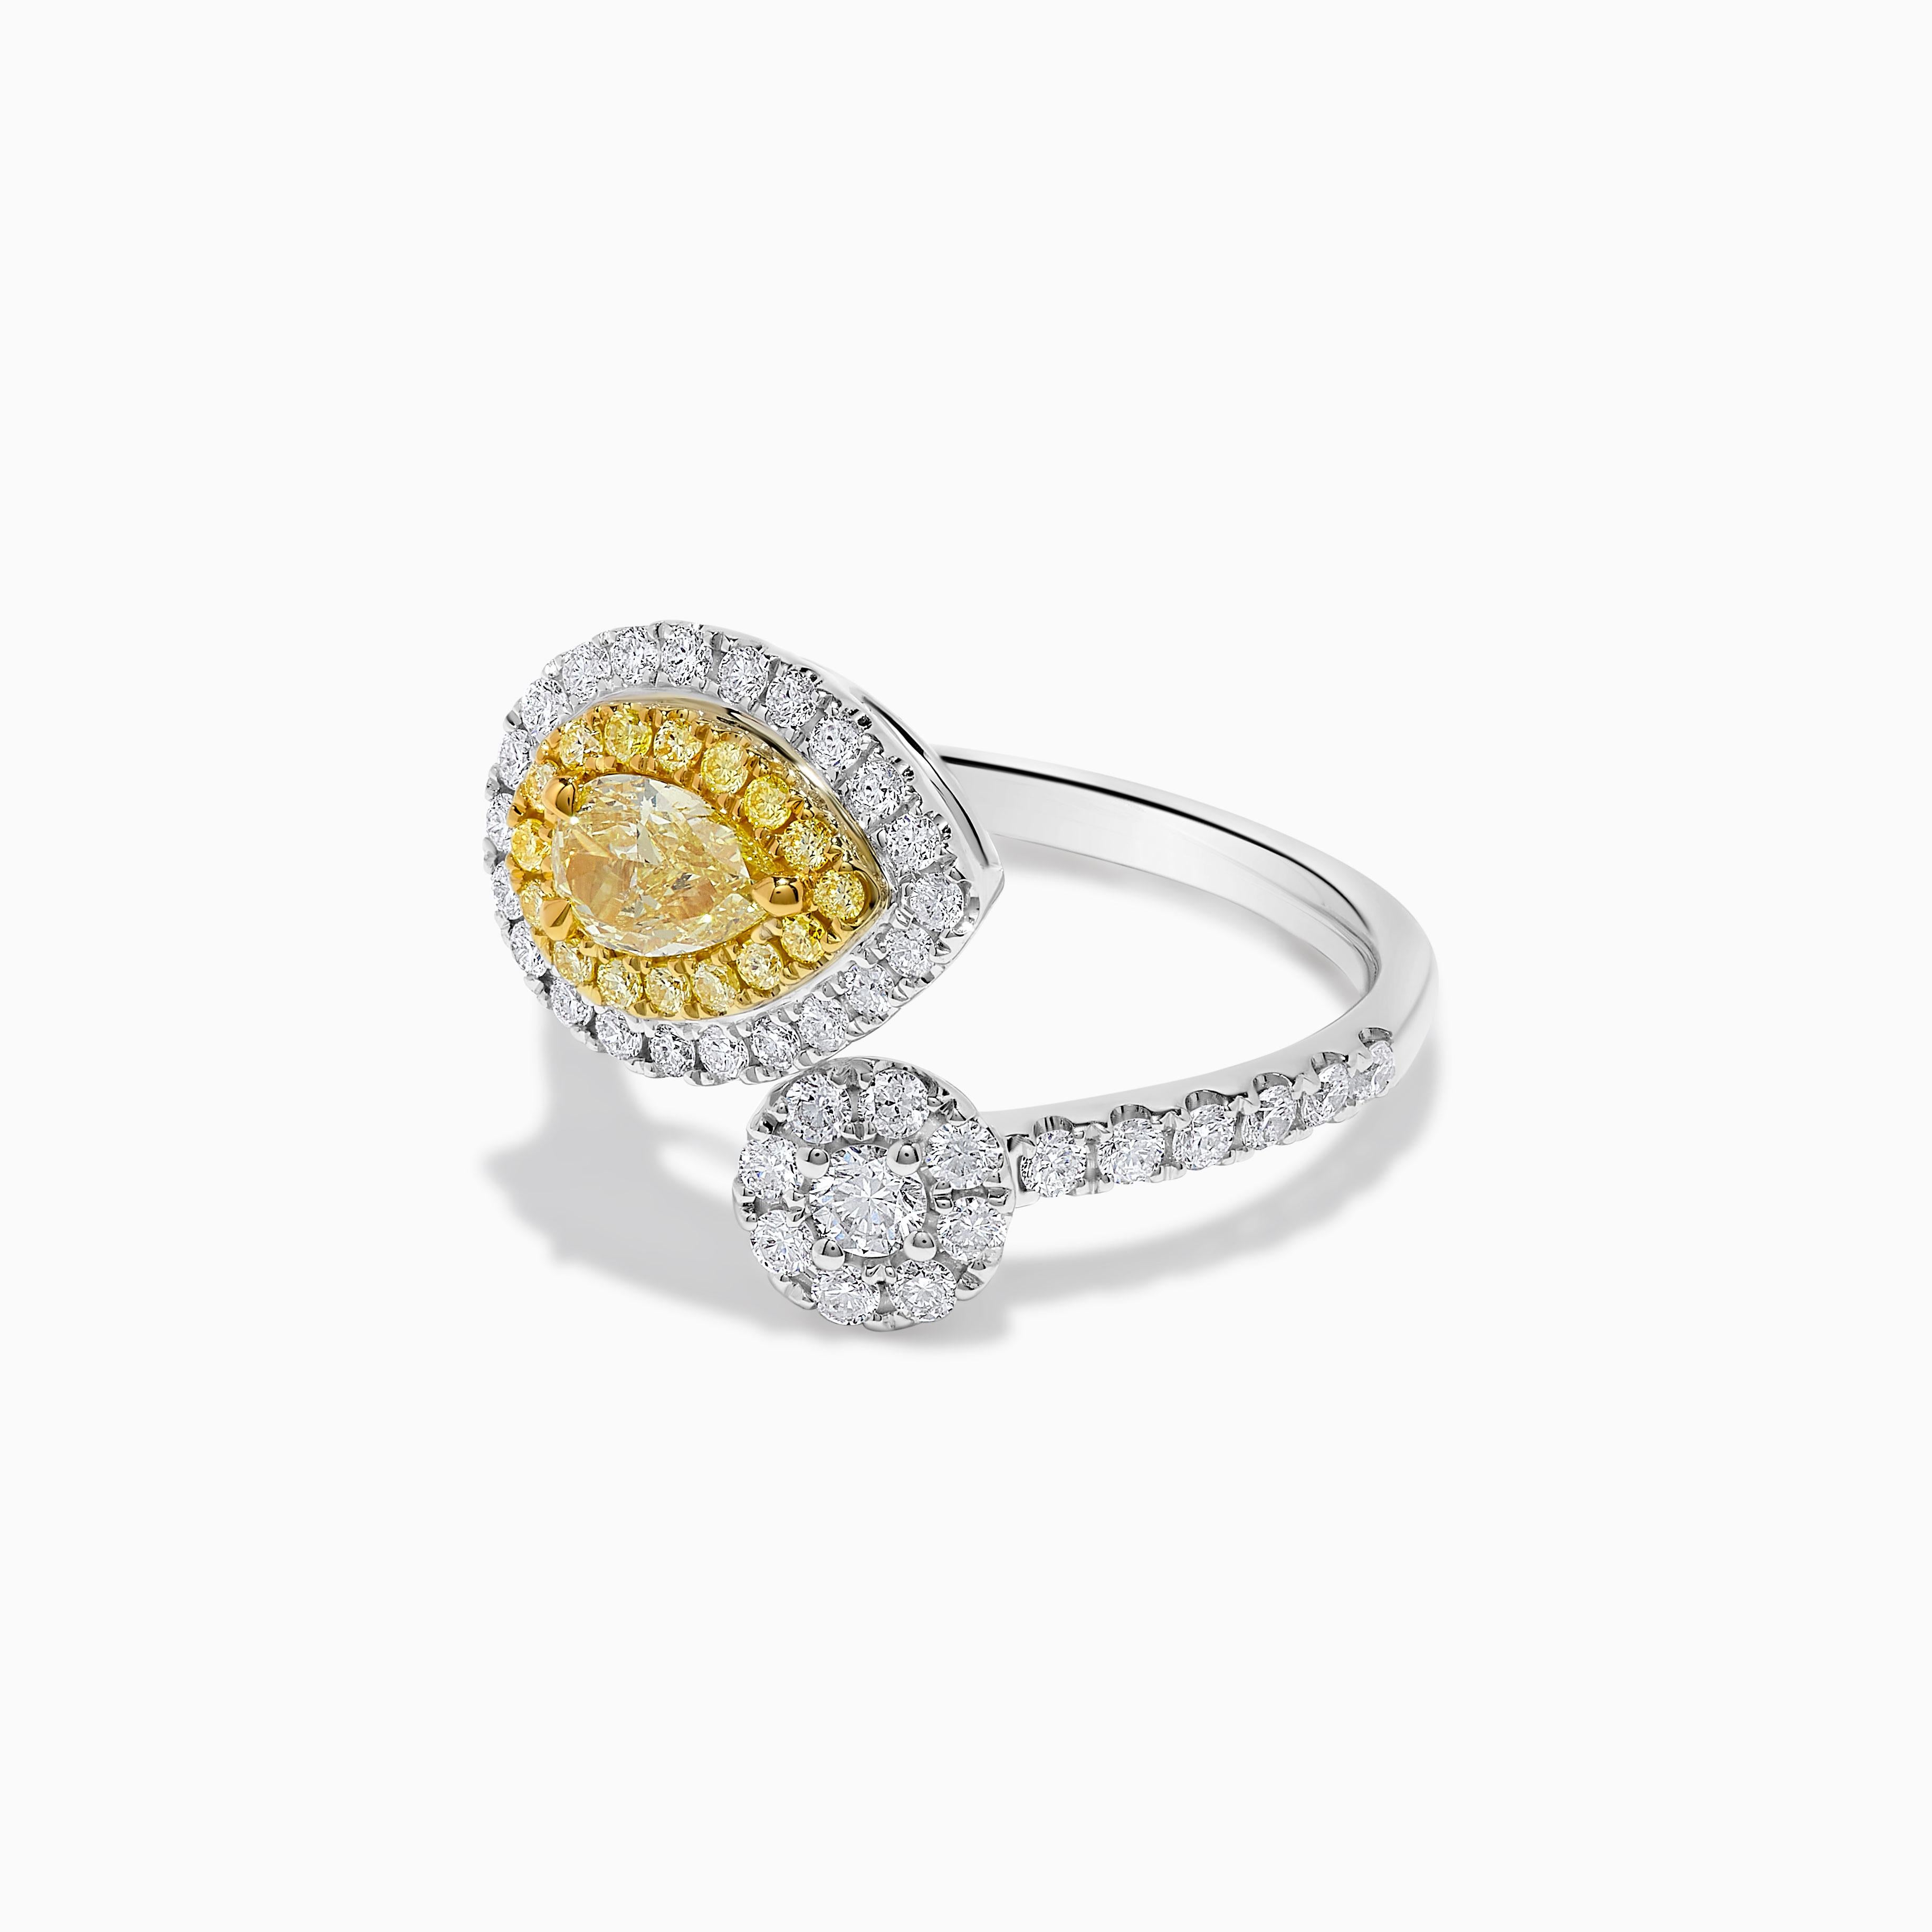 RareGemWorld's classic GIA certified diamond ring. Mounted in a beautiful 18K Yellow and White setting with a natural pear cut yellow diamond. The yellow diamond is surrounded by round natural white diamond melee and round natural yellow diamond